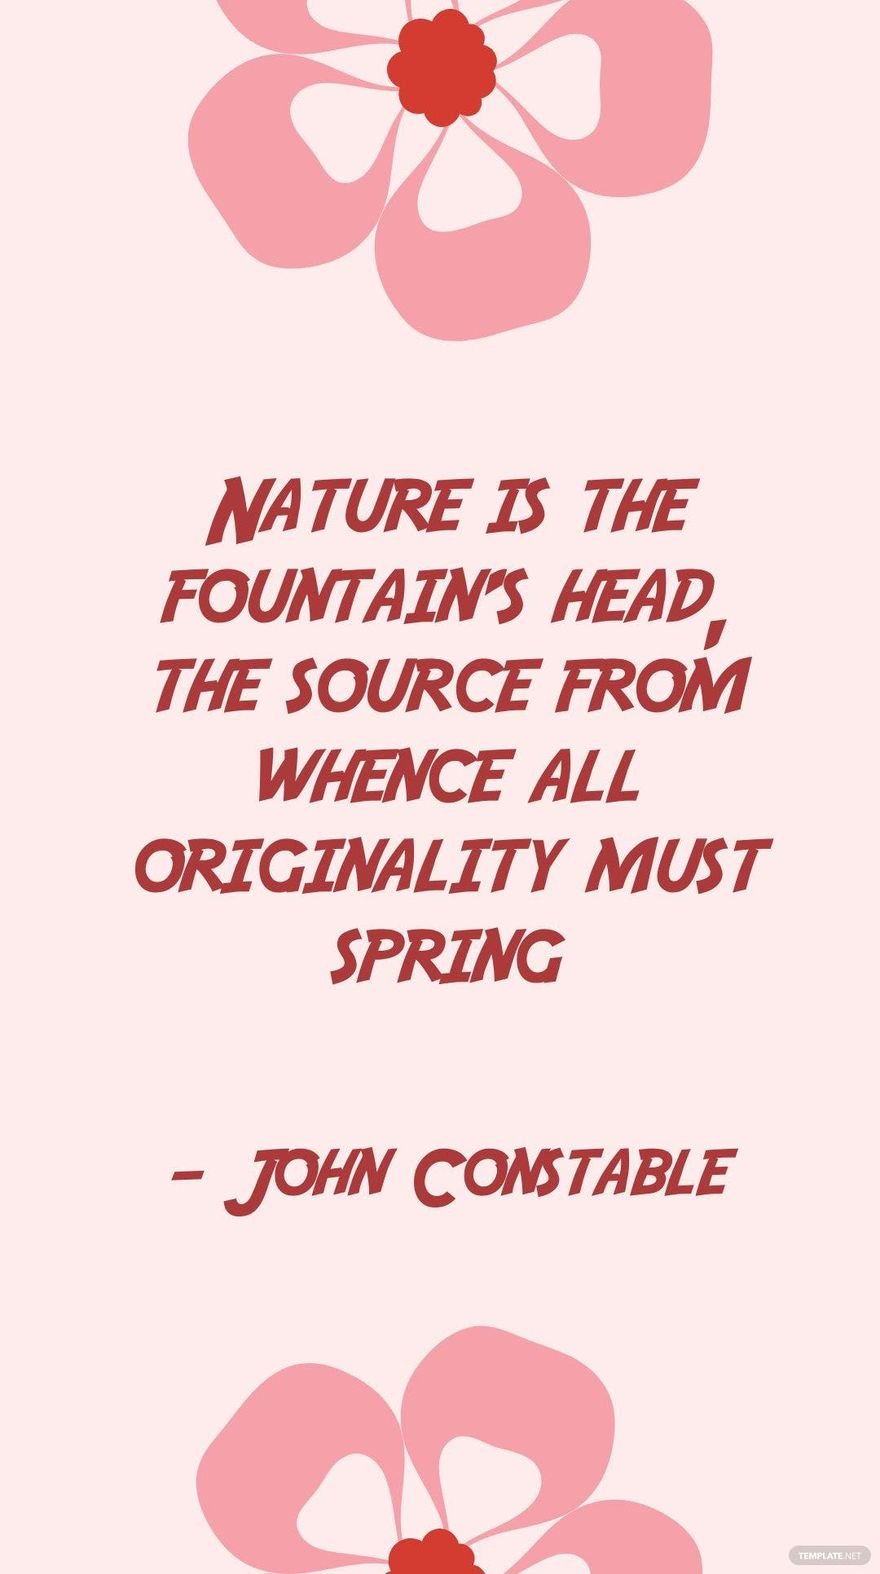 John Constable - Nature is the fountain's head, the source from whence all originality must spring